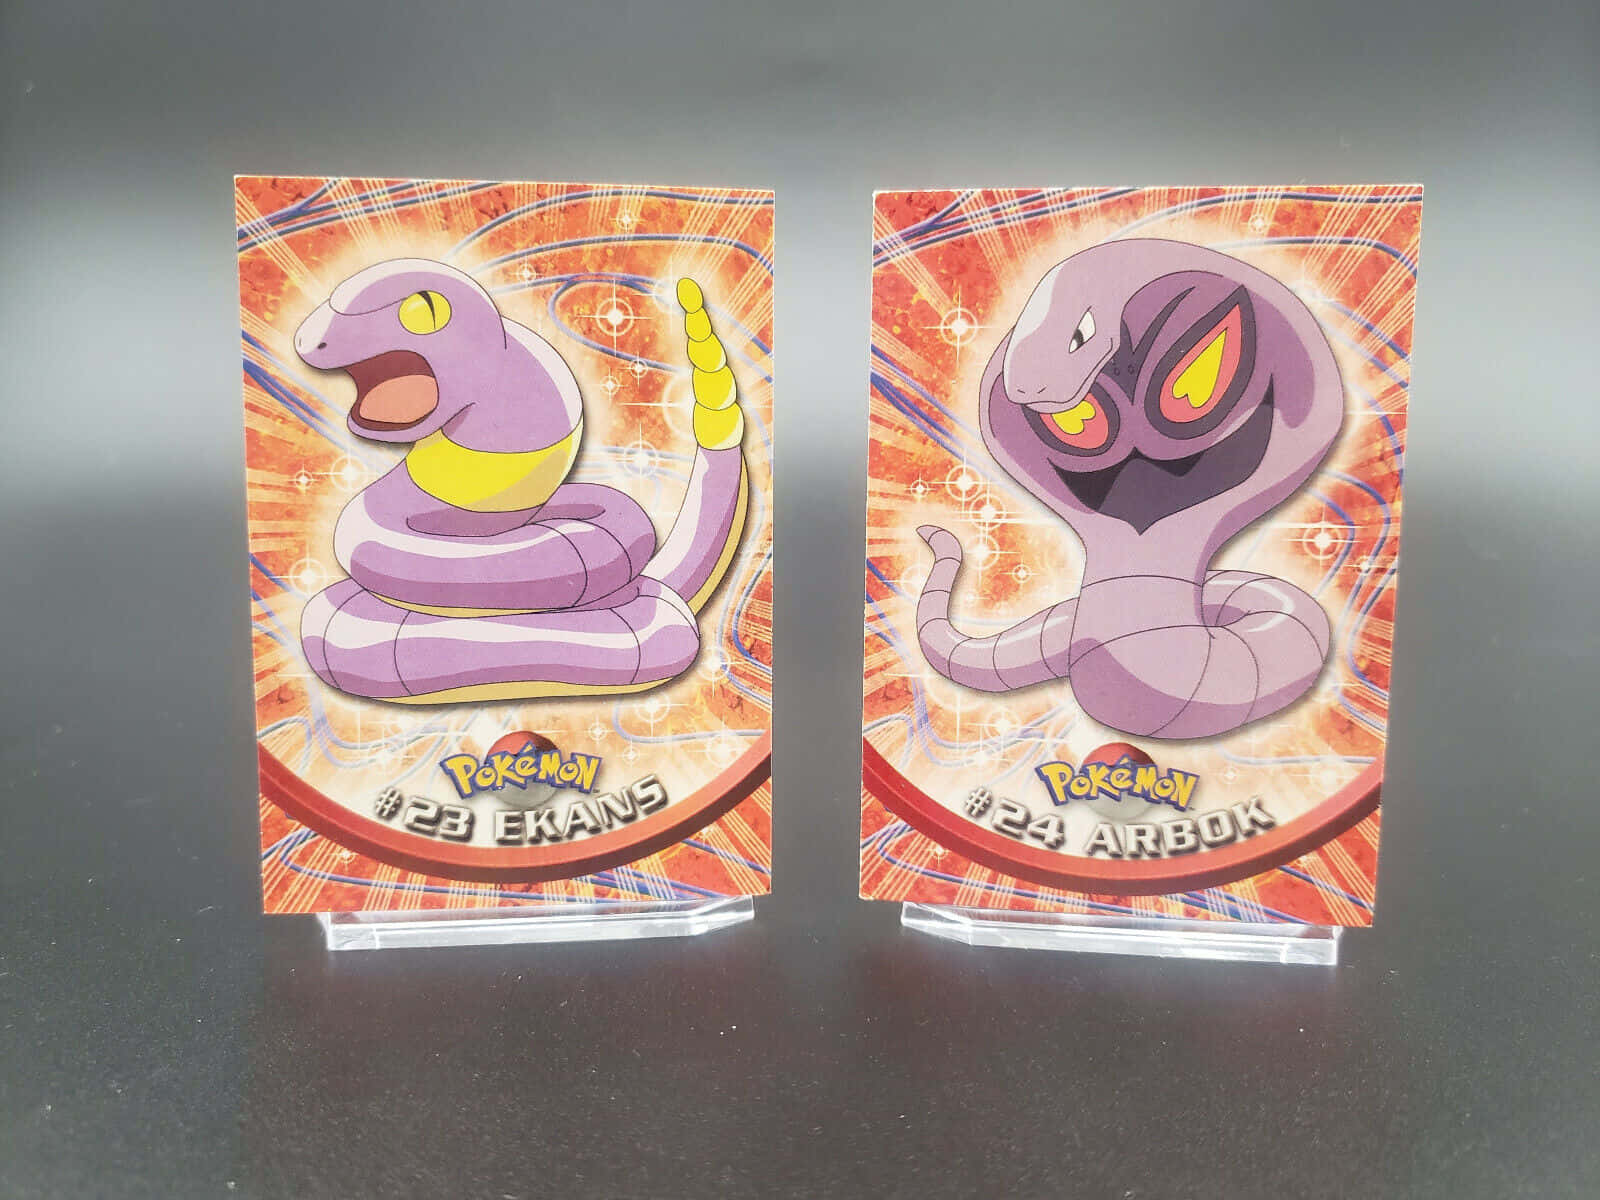 Ekans And Arbok Cards On Blurry Gray Background Wallpaper